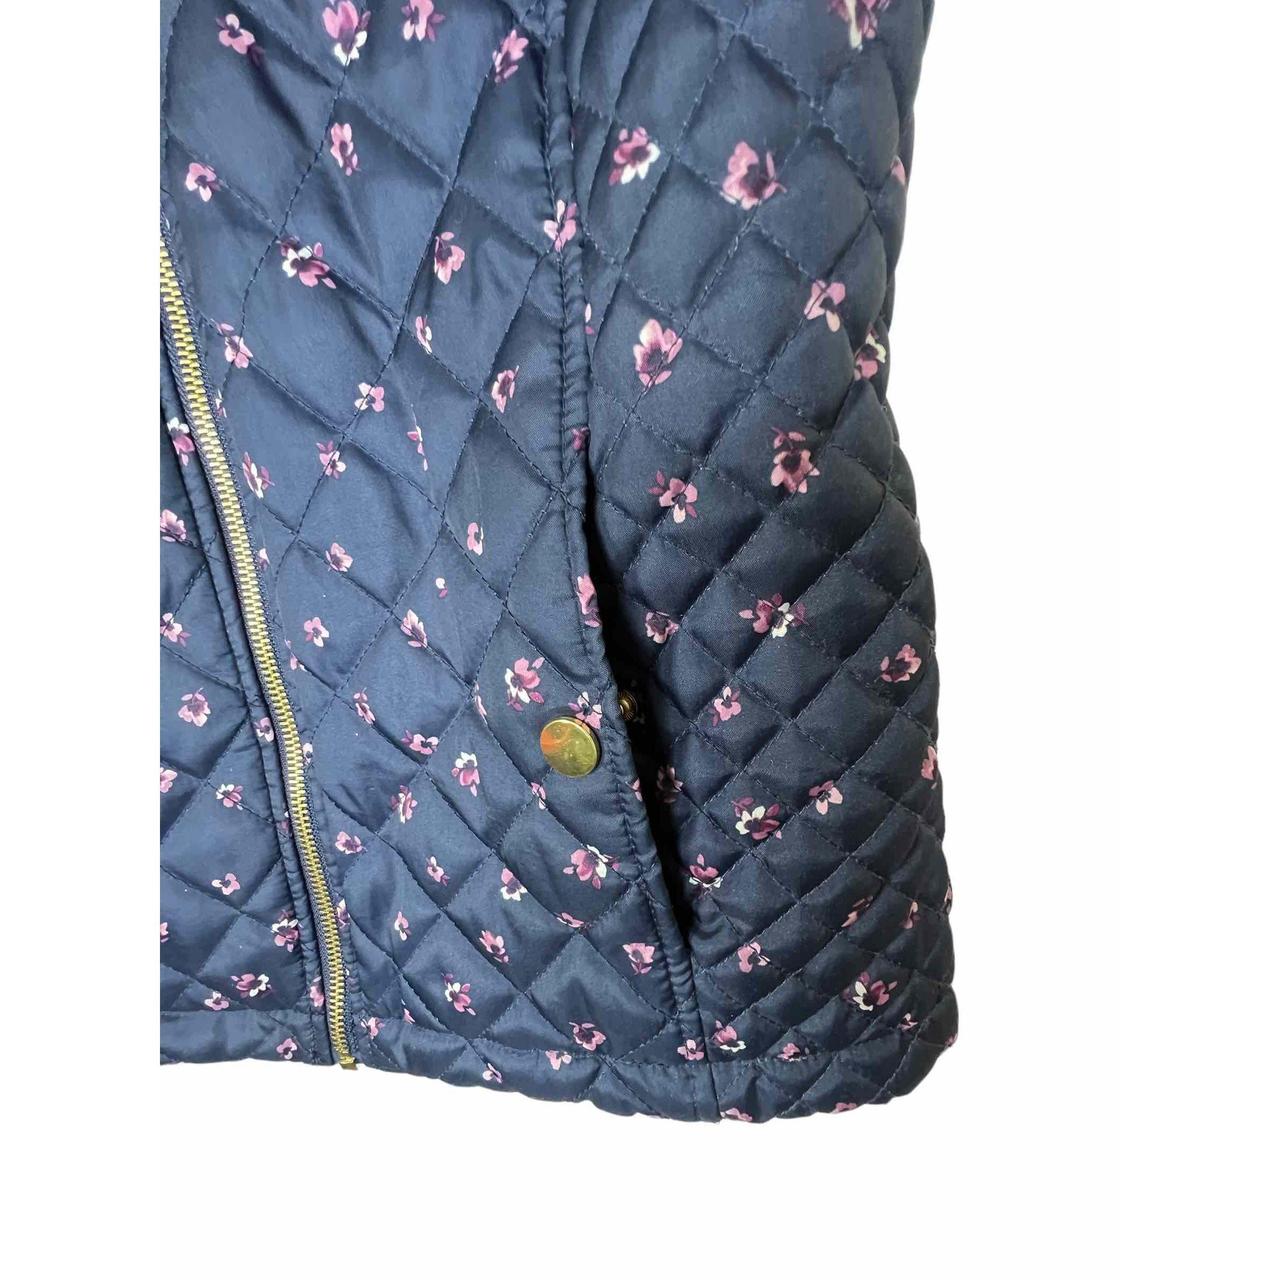 Basic Editions Women's Blue and Pink Gilet (2)